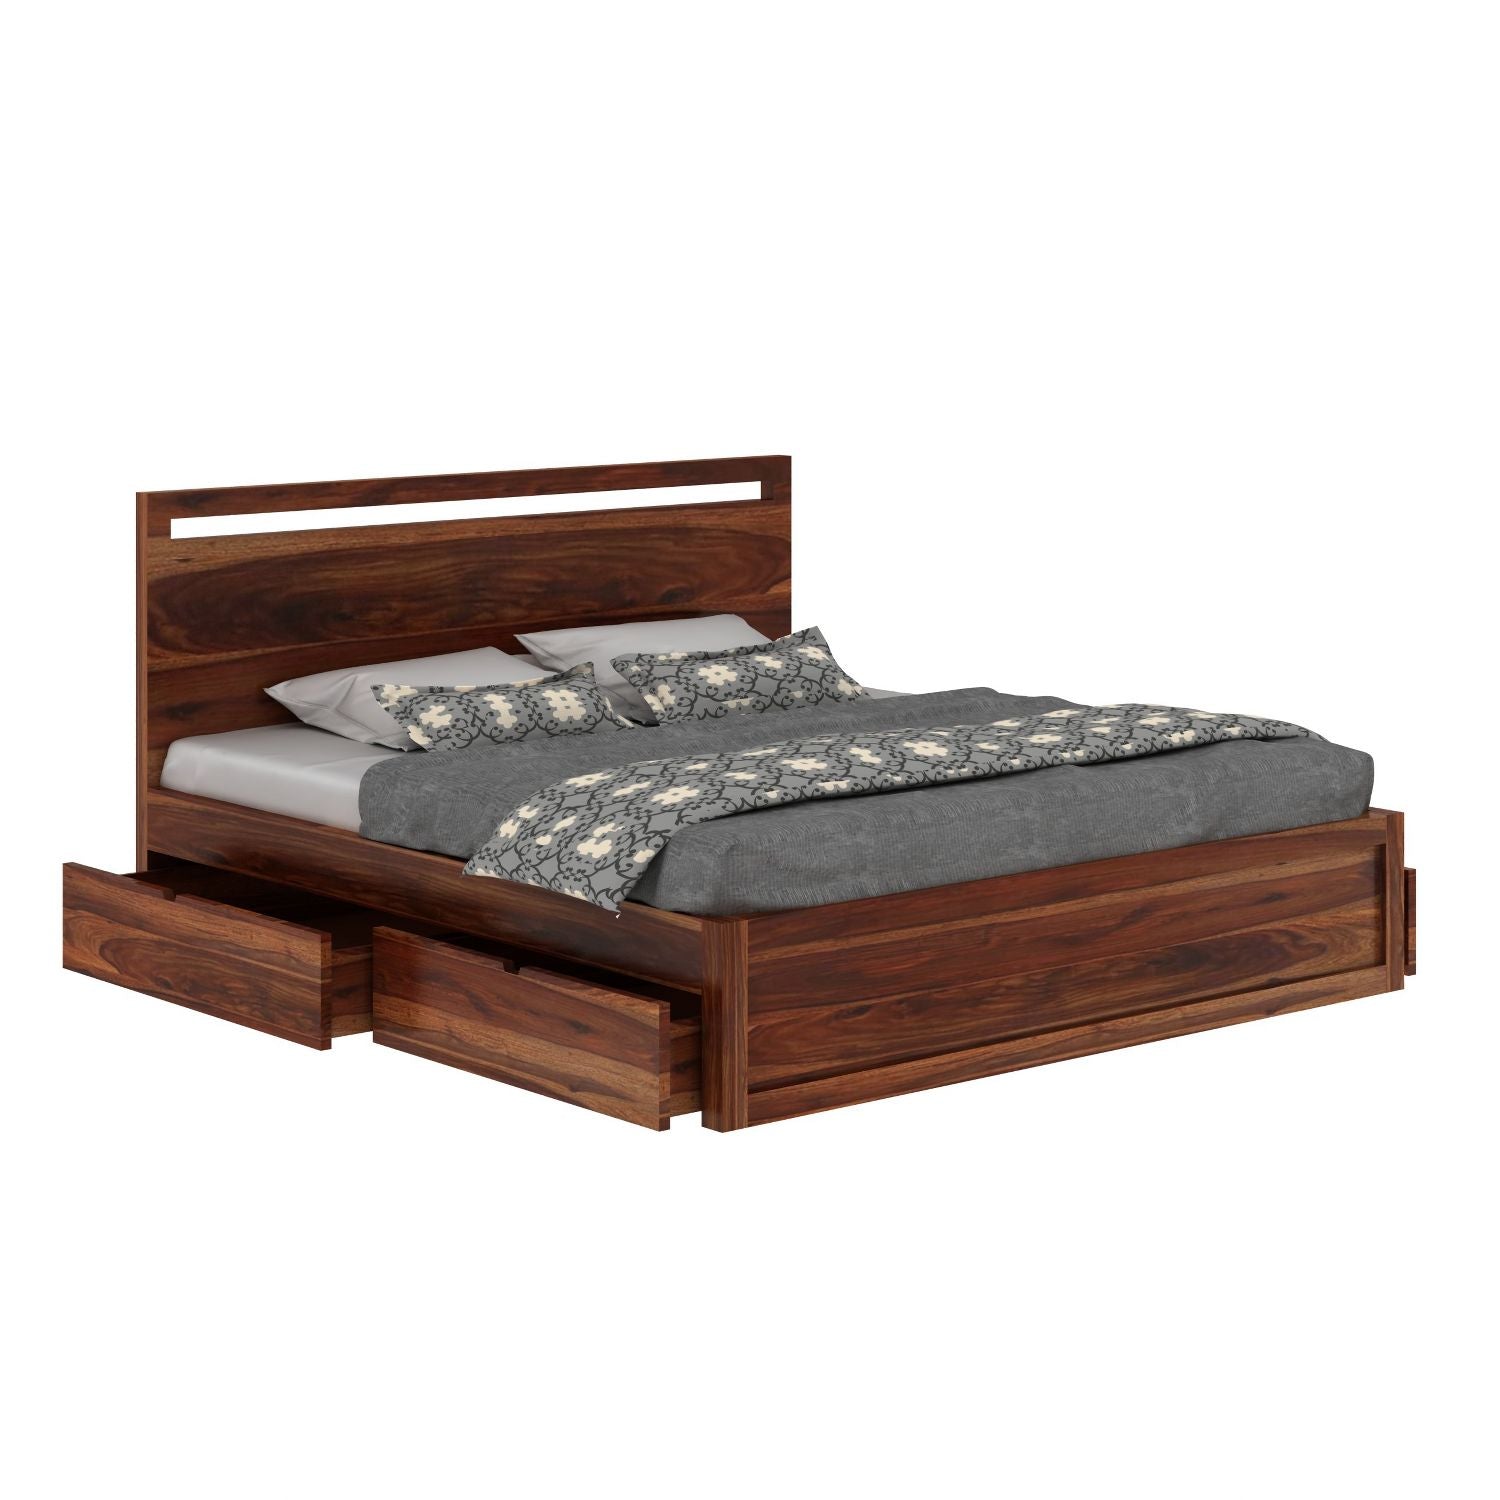 Livinn Solid Sheesham Wood Bed With Four Drawers (King Size, Natural Finish)